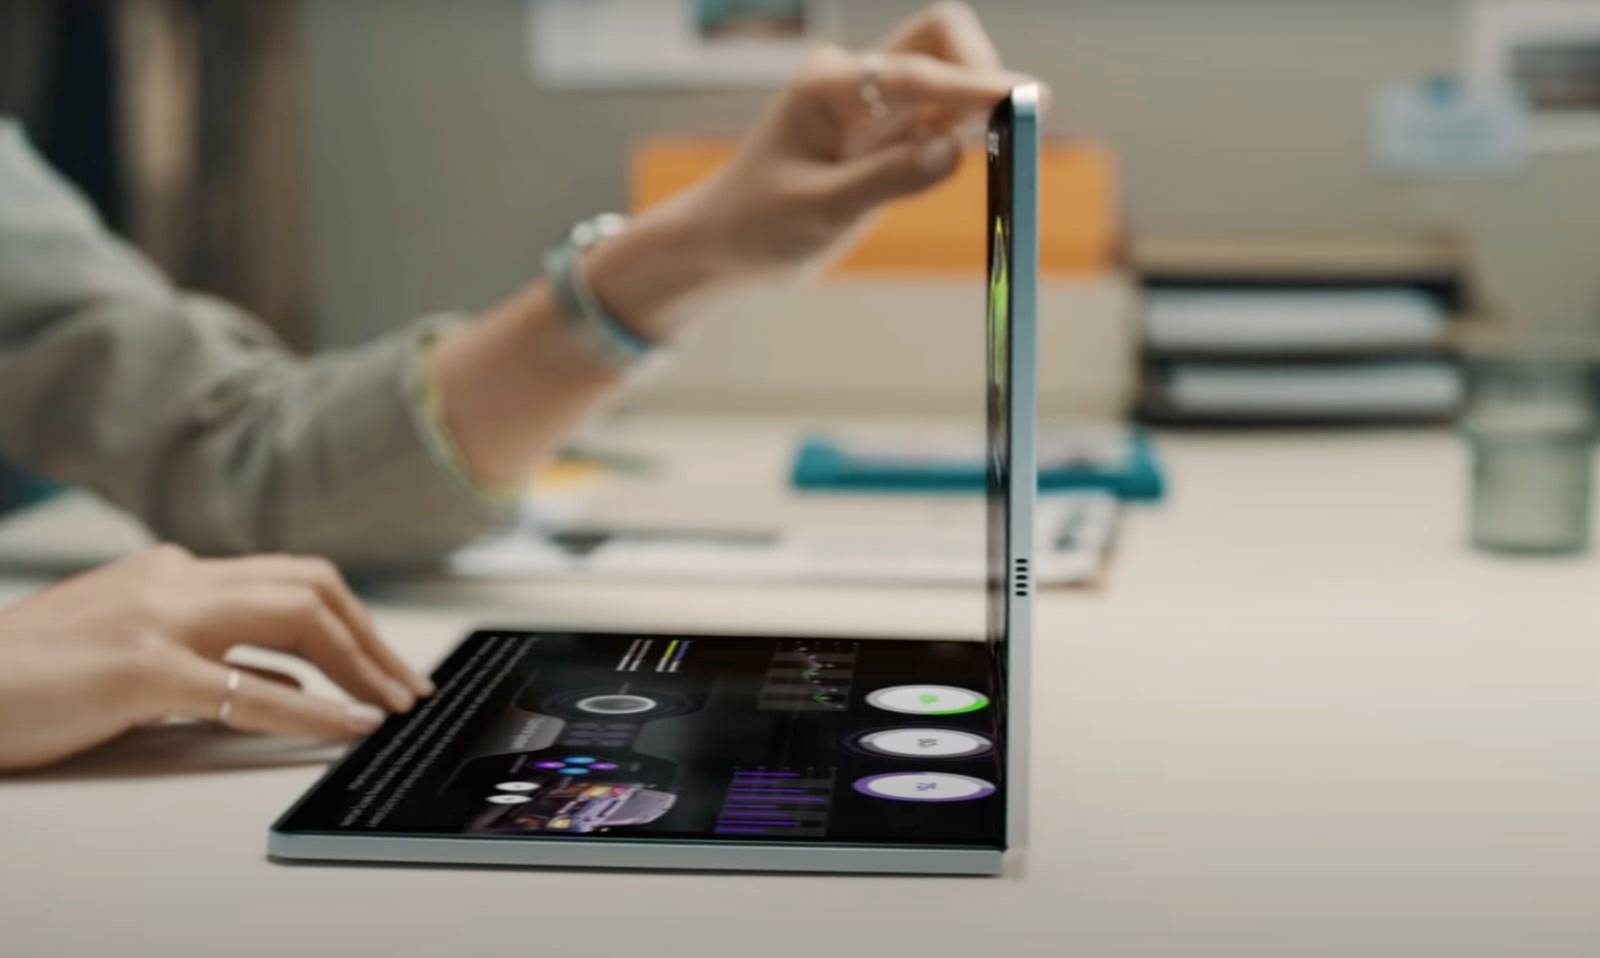 Samsung could per chance perchance furthermore rapidly launch a 17-lag foldable notebook computer